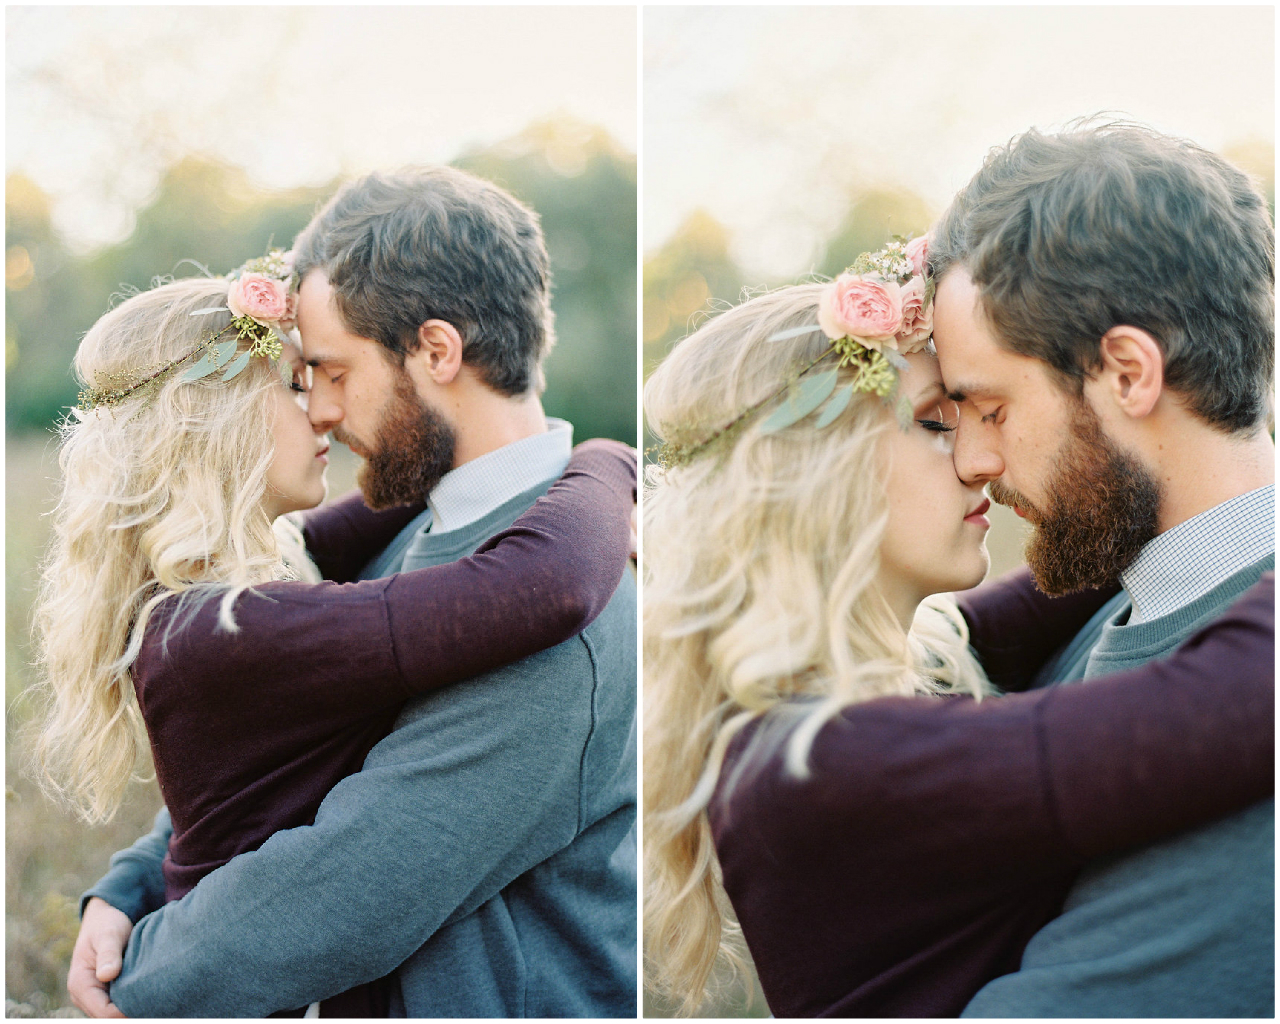 Michigan Autumn Engagement Session | Ashley Slater Photography | Flower Crown | The Day's Design